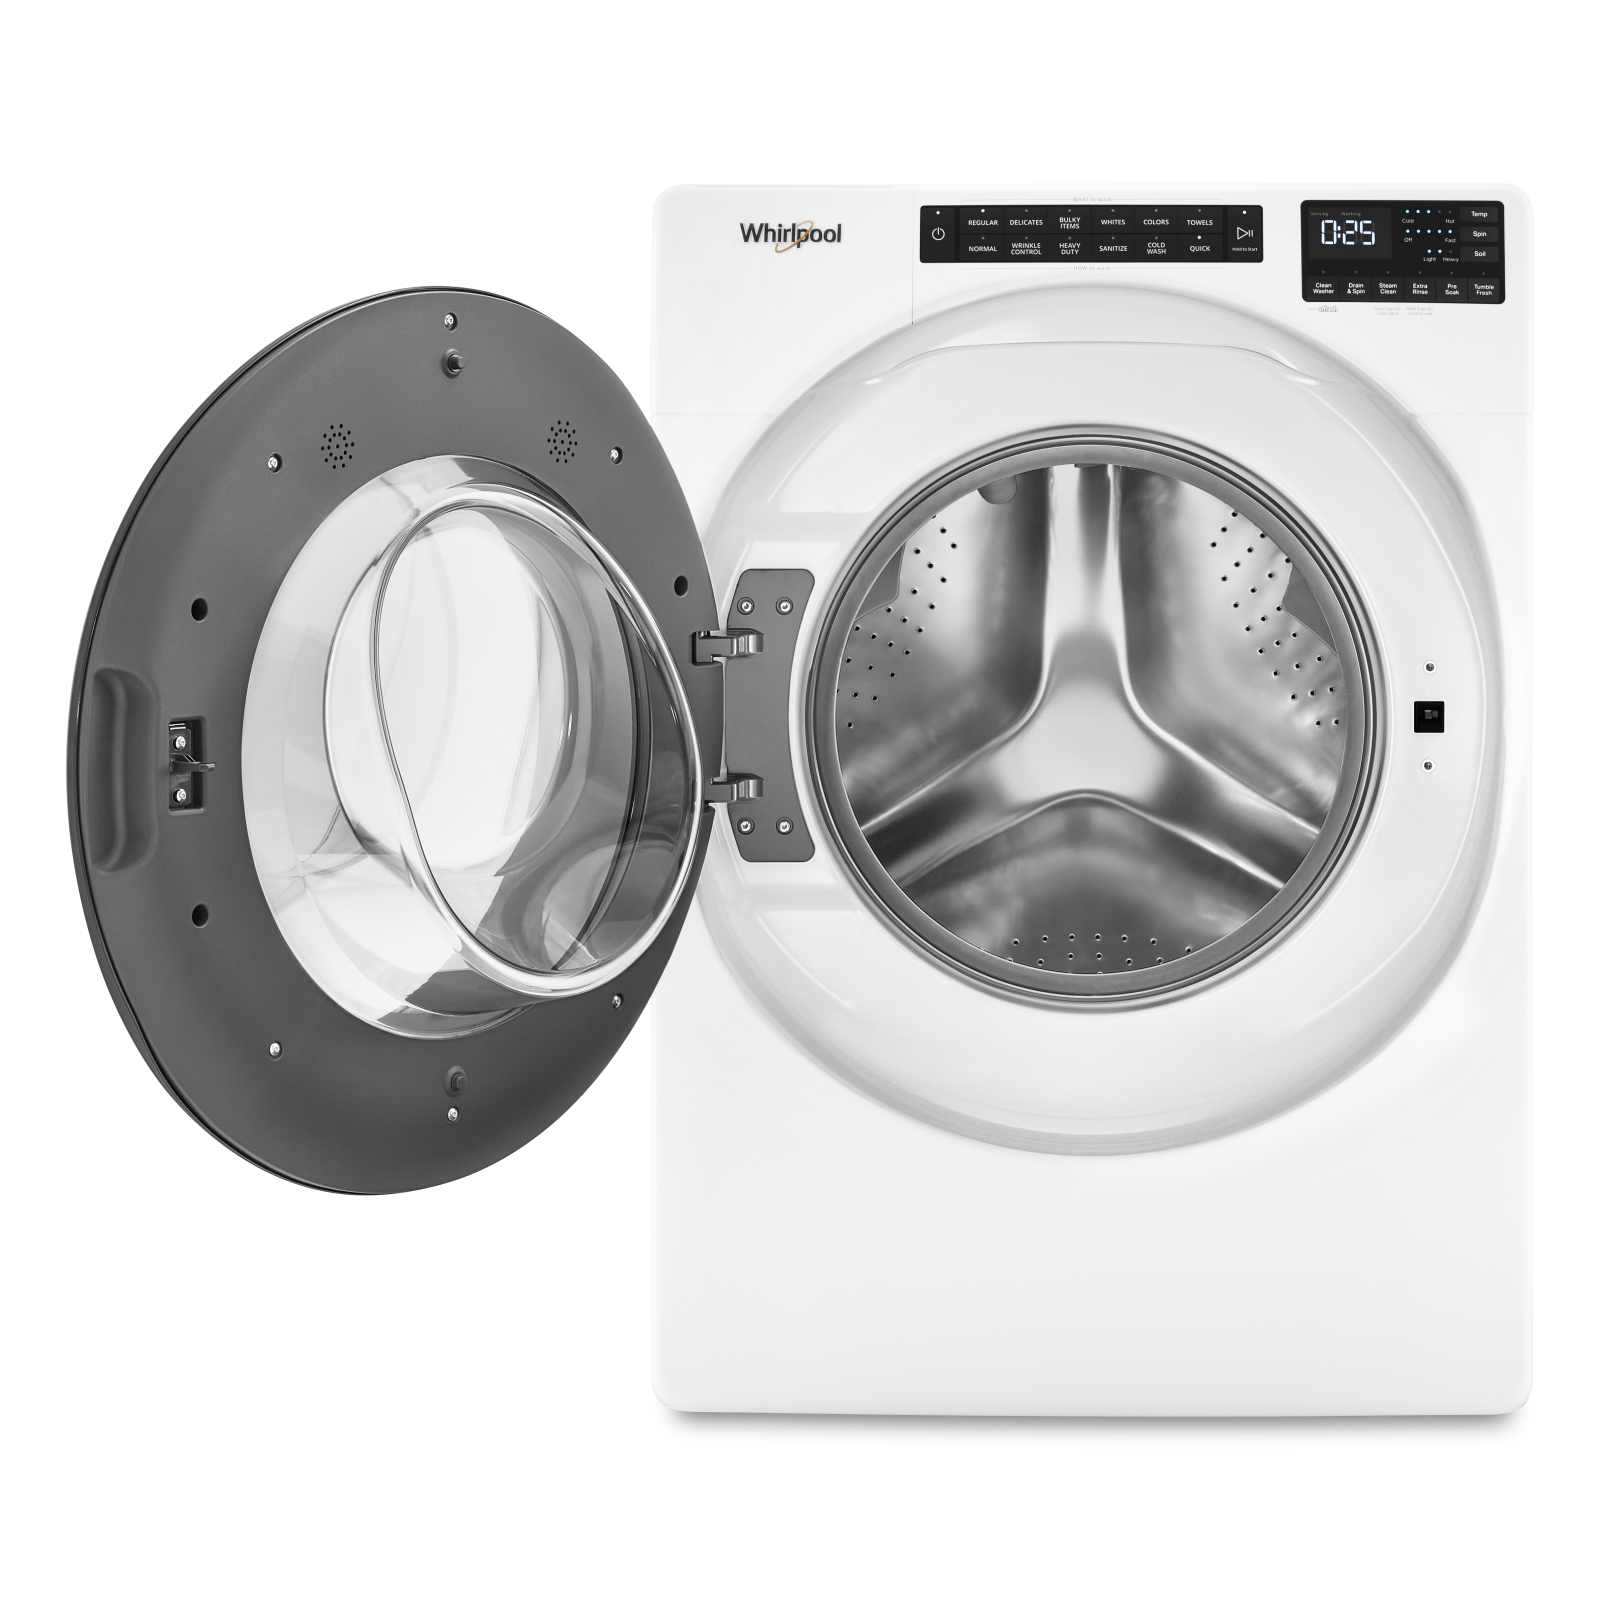 Whirlpool - 5.2 cu. Ft  Front Load Washer in White - WFW5605MW